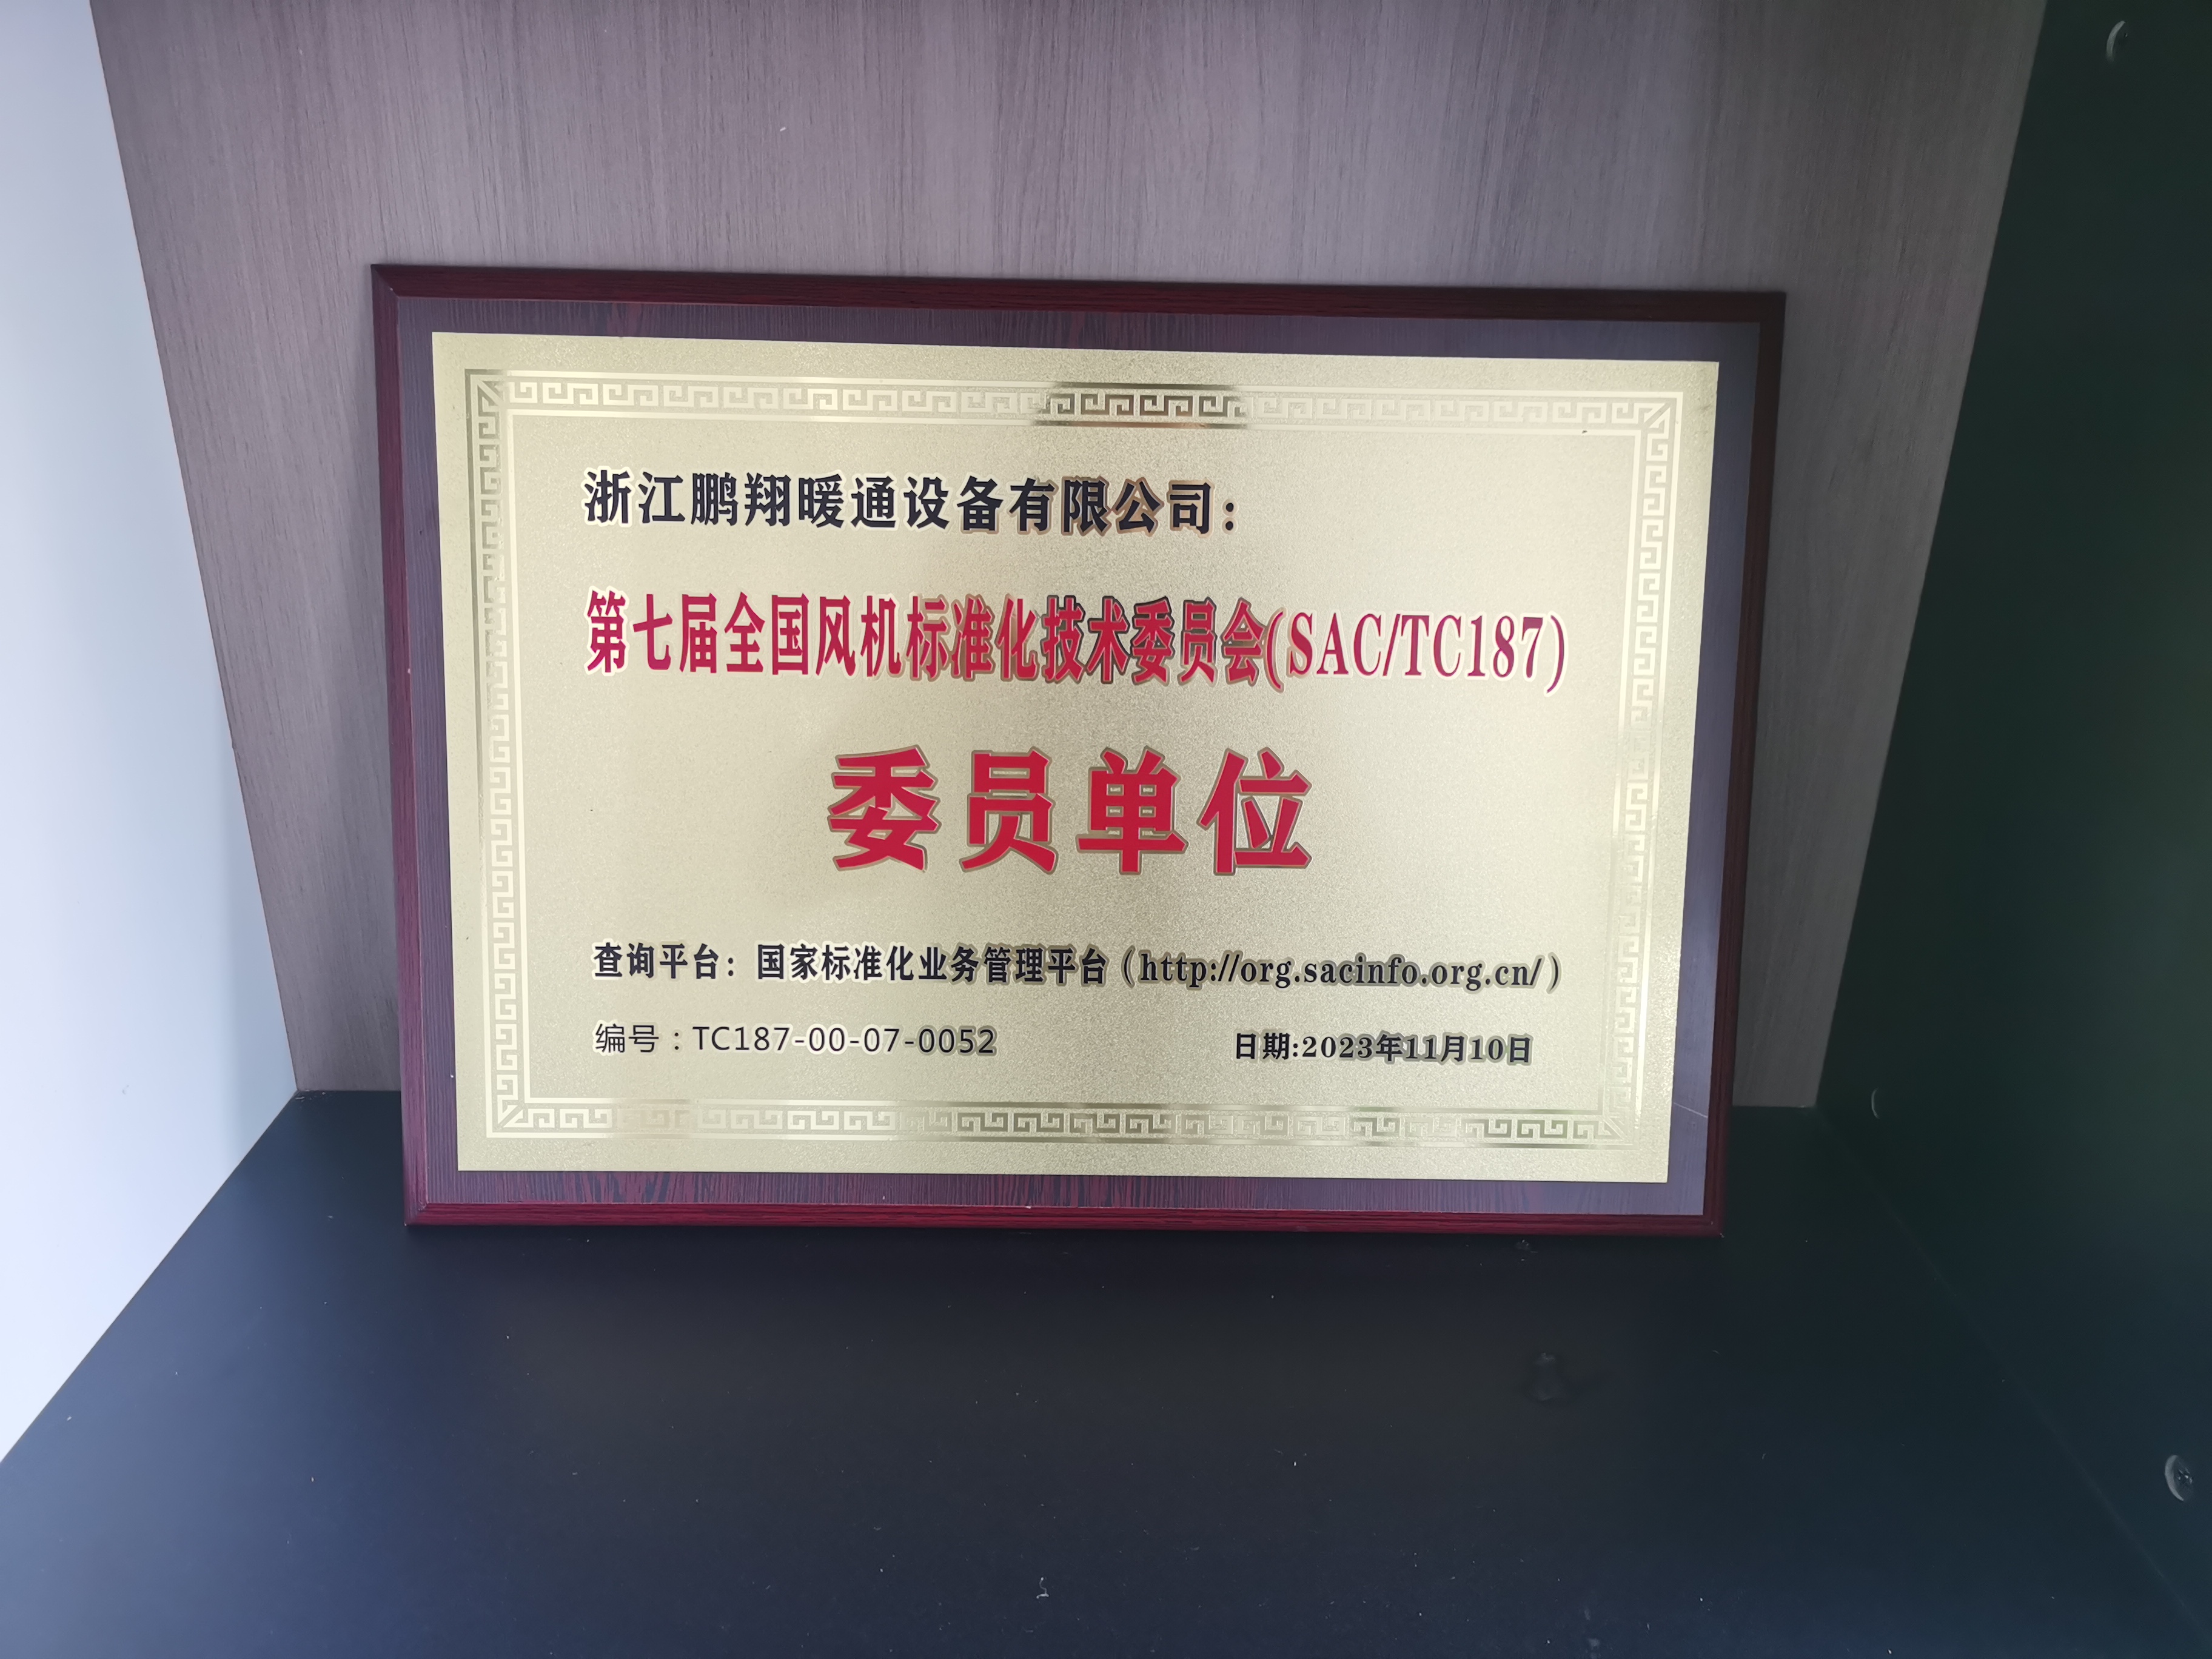 VALMET Paper Machinery Technology Team Gives Highest Rating to Zhejiang Pengxiang HVAC Equipment Co., Ltd. During Annual Audit Inspection